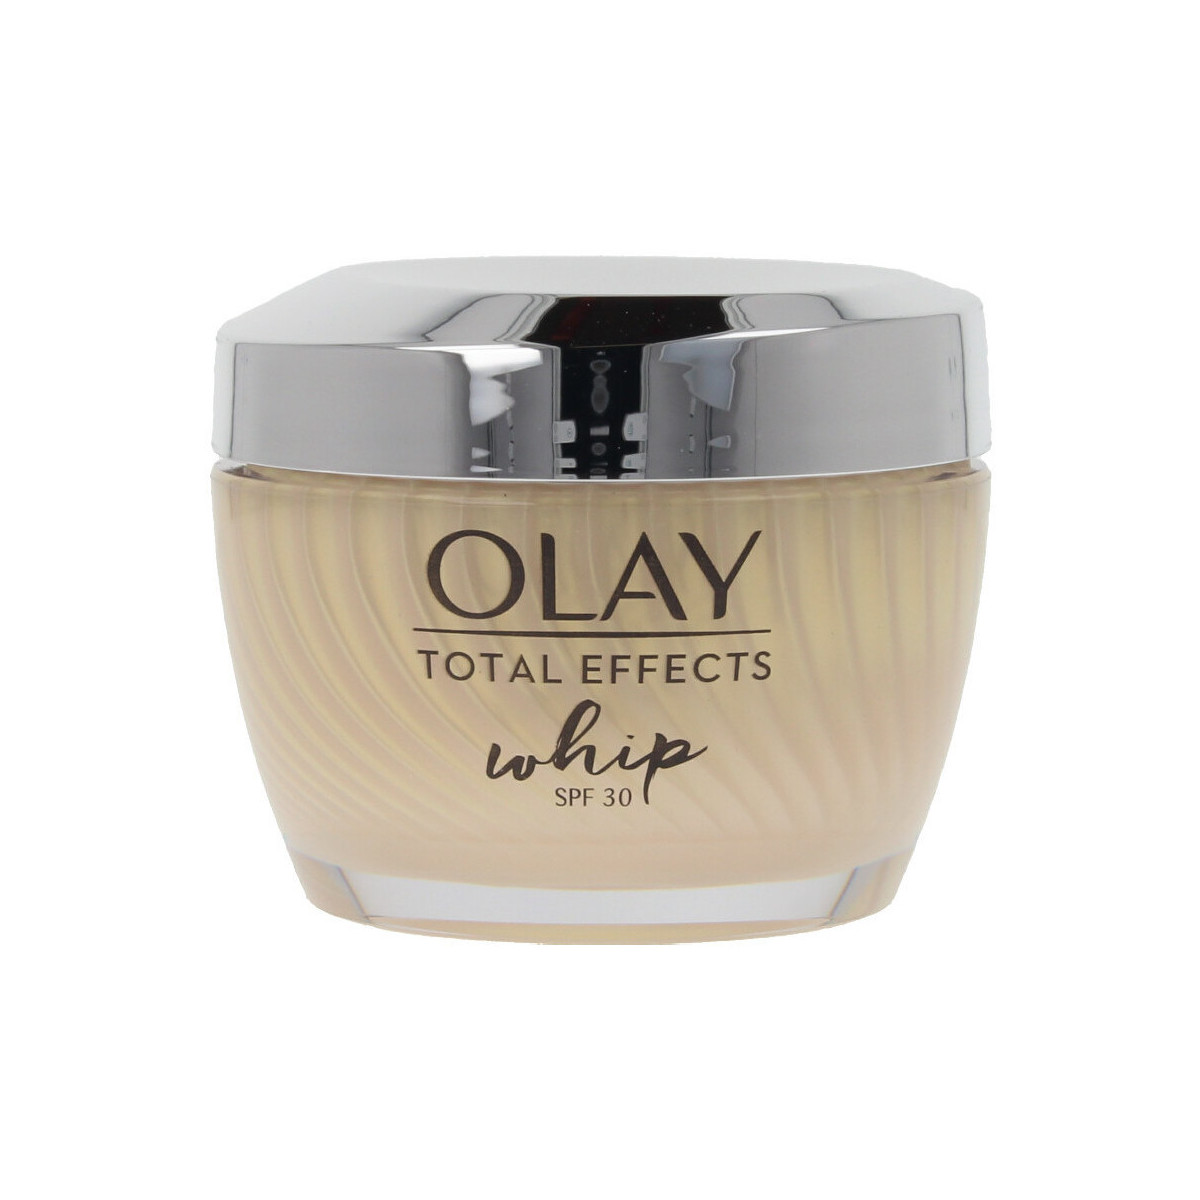 Beauté Femme Anti-Age & Anti-rides Olay Whip Total Effects Crema Hidratante Activa Spf30 